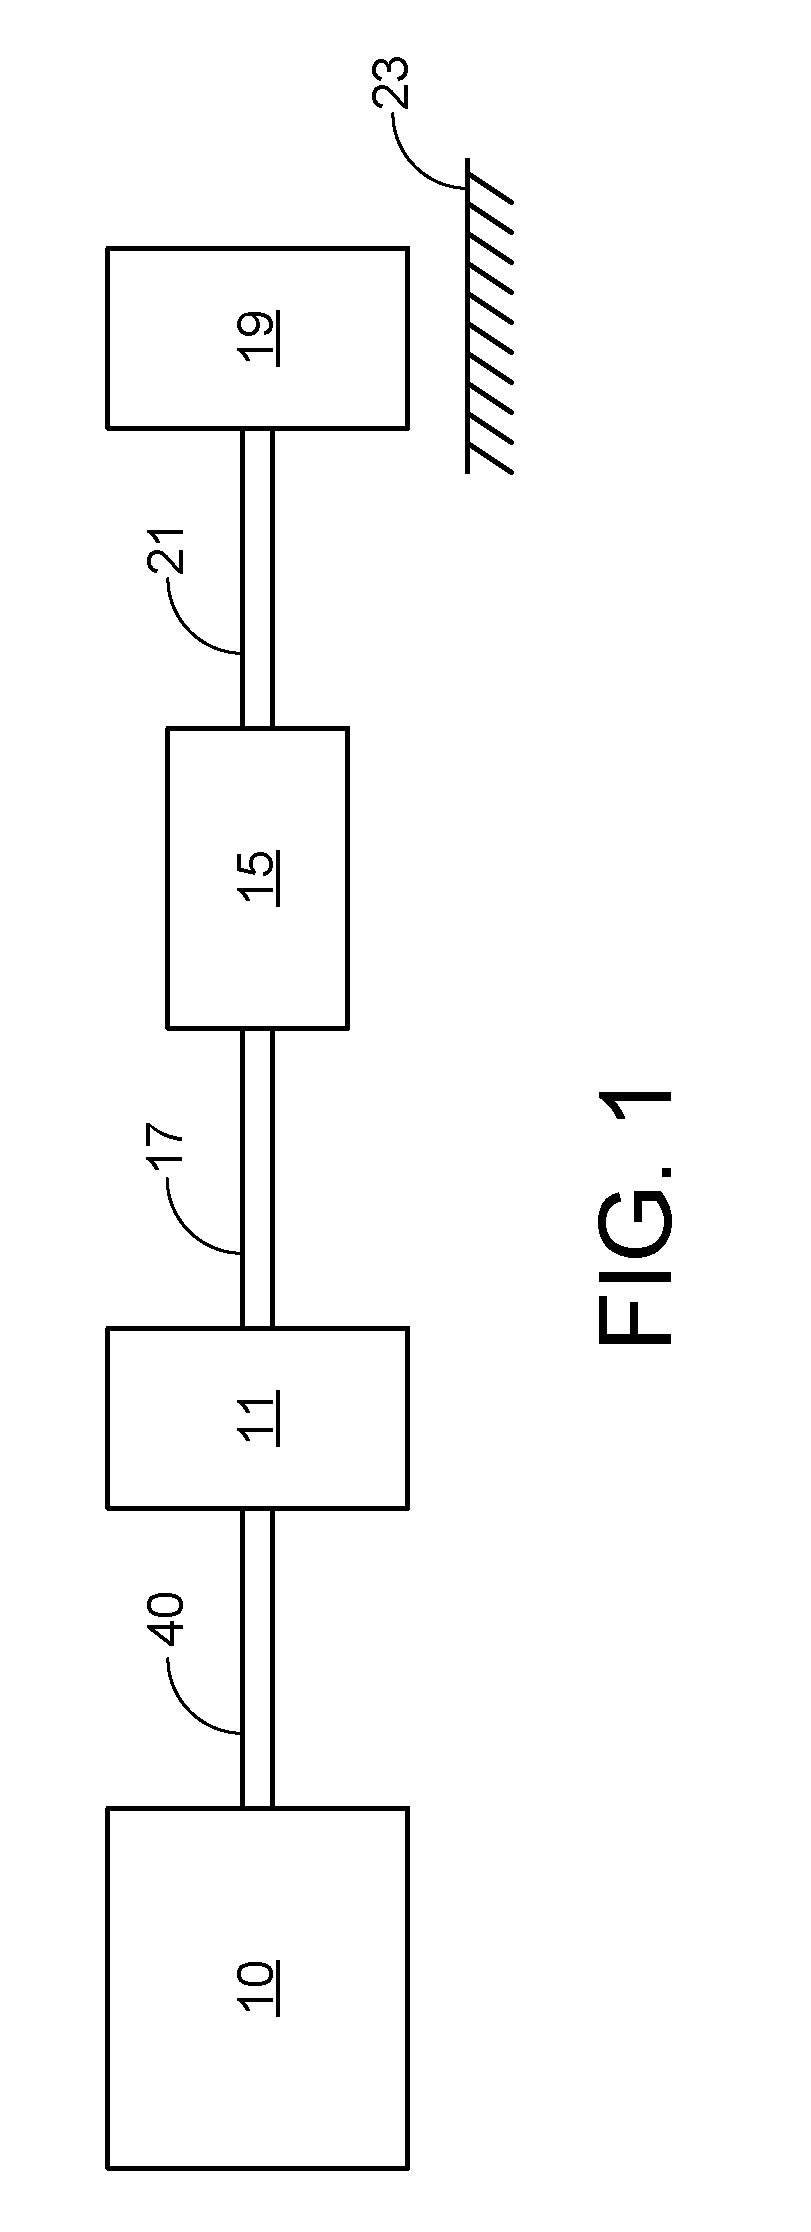 System and method for restarting an engine